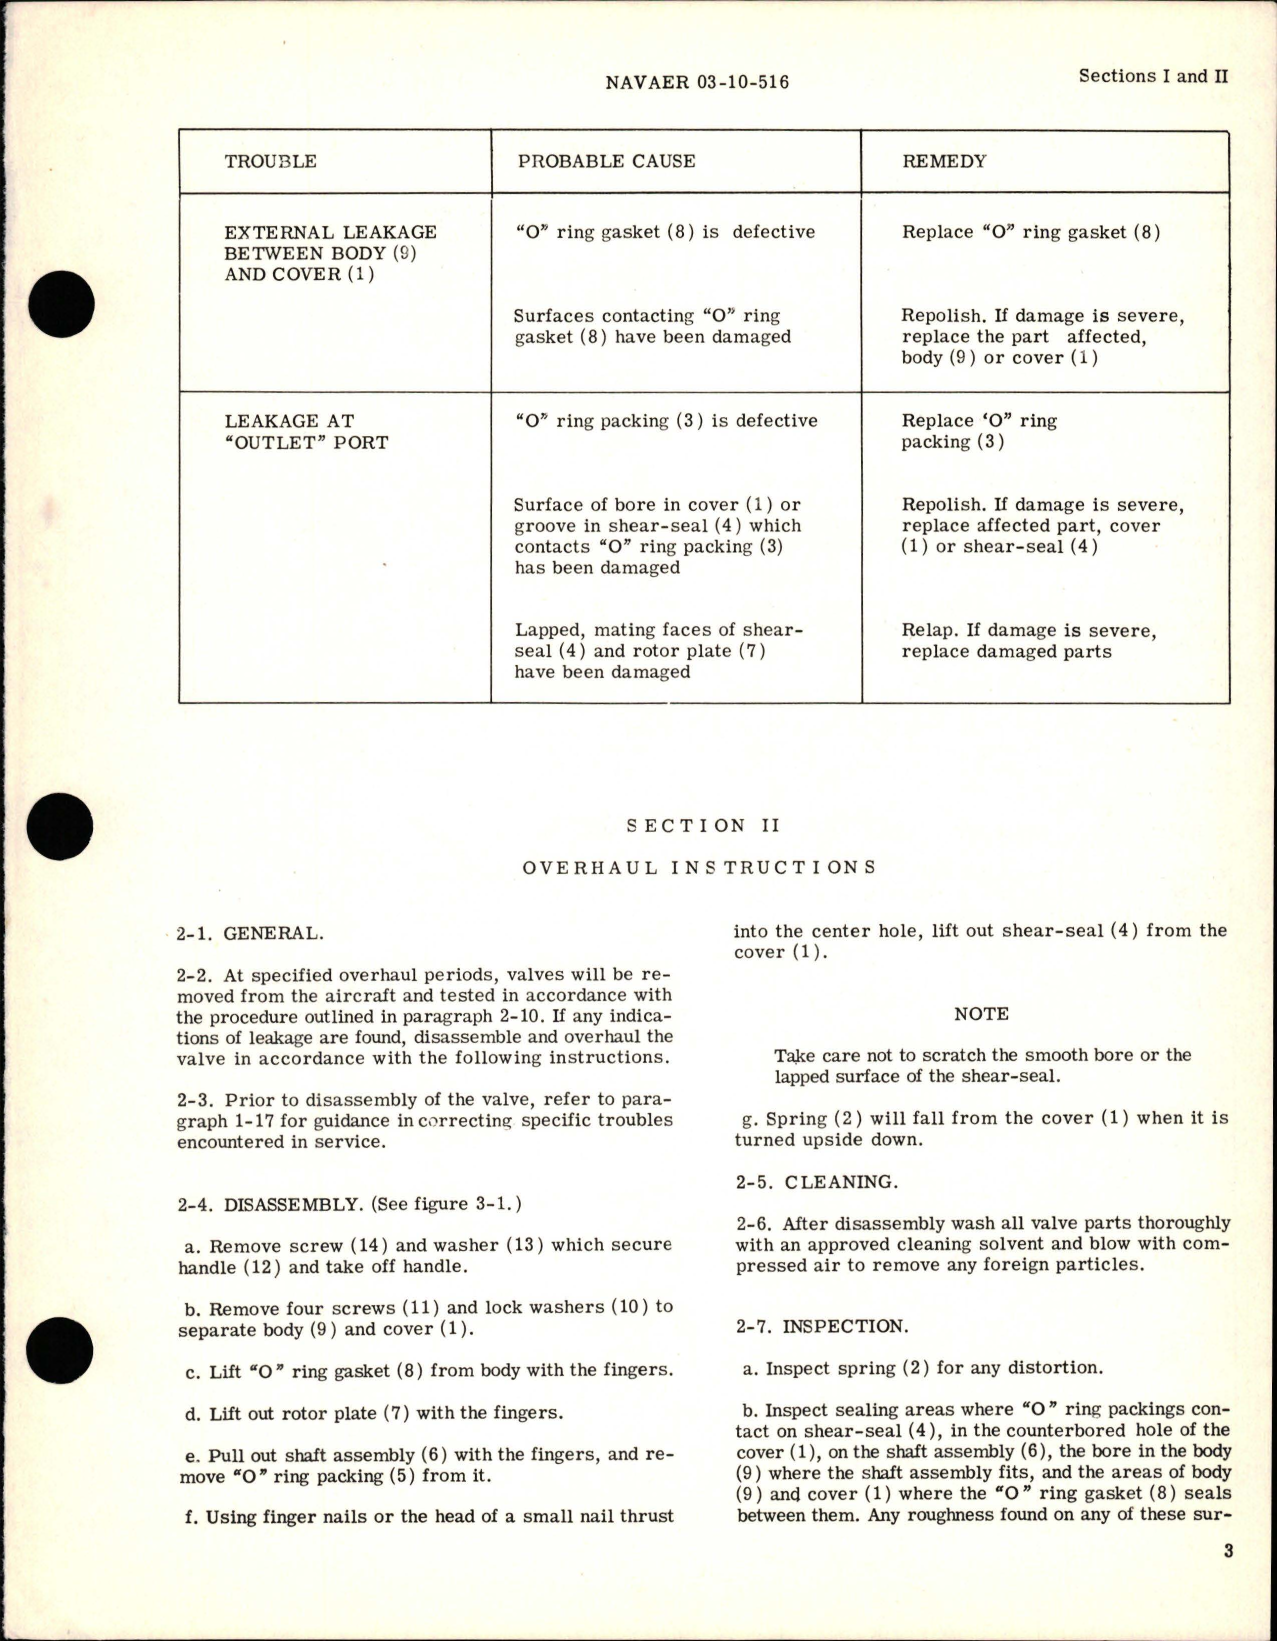 Sample page 5 from AirCorps Library document: Operation, Service, Overhaul Instructions and Parts Catalog for Low Pressure Fuel Shut-Off Valve - Part 5368